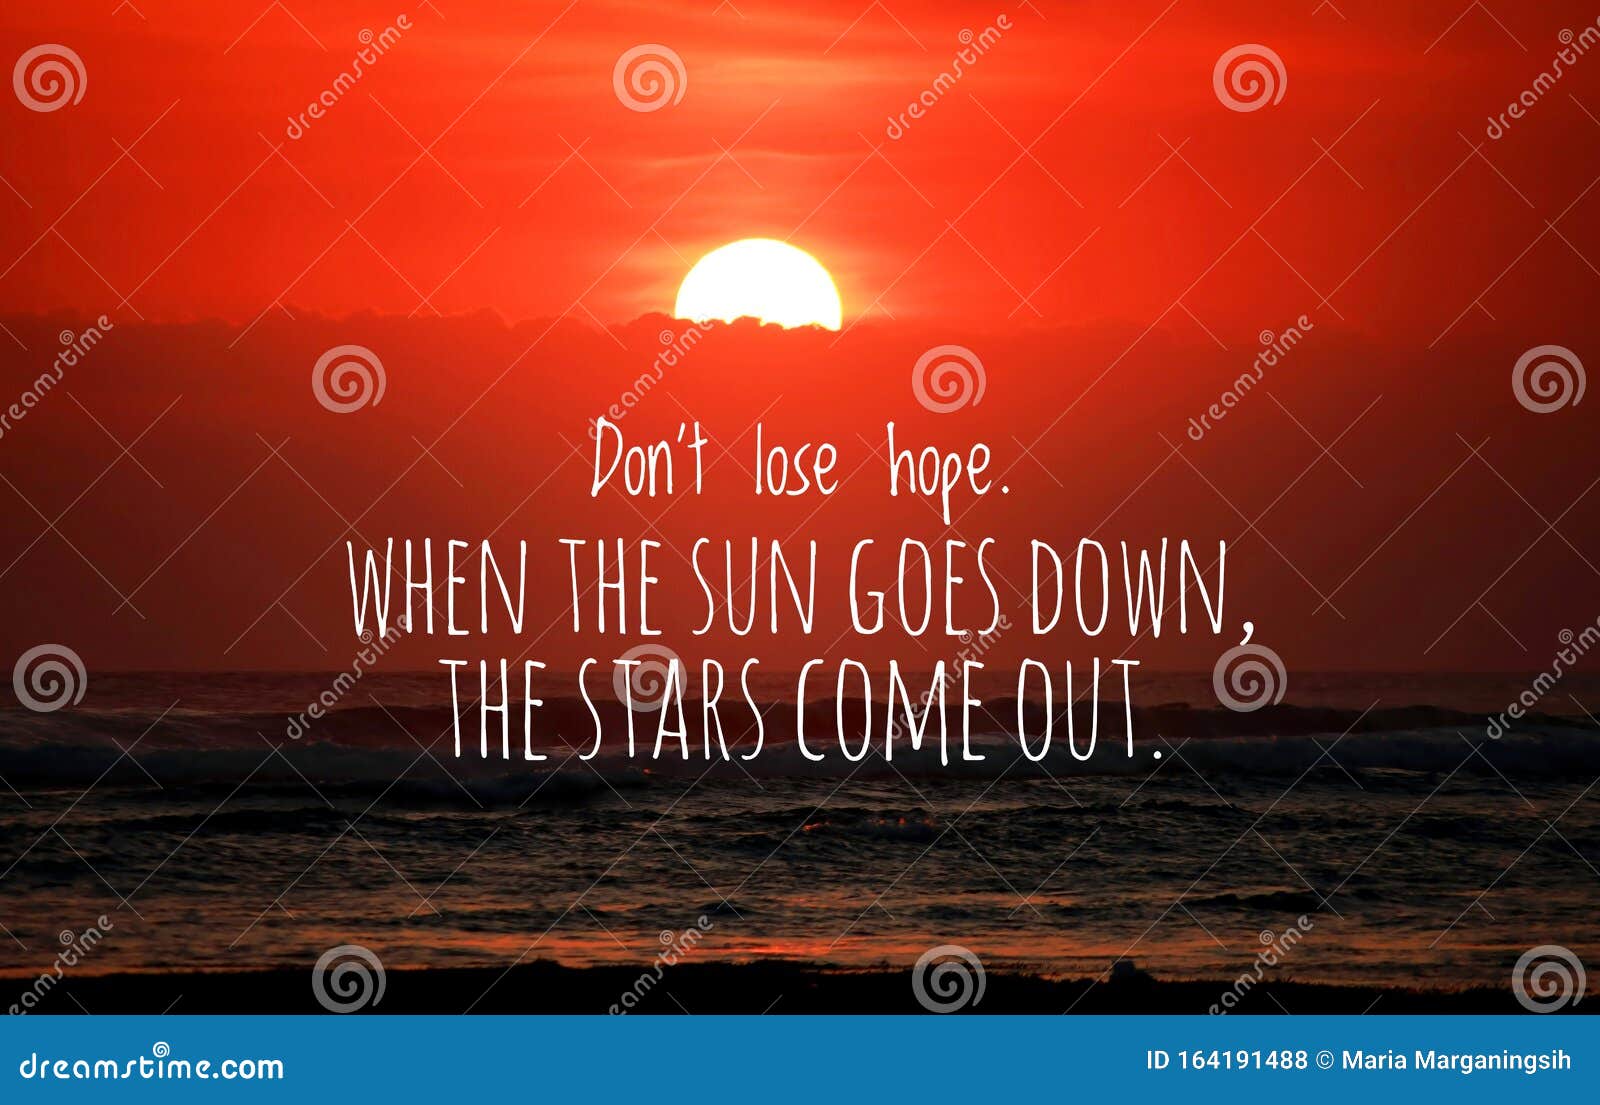 Inspirational Quote Do Not Lose Hope When The Sun Goes Down The Stars Come Out With Blurry Sunset Background Over The Sea Stock Photo Image Of Ocean Landscape 164191488